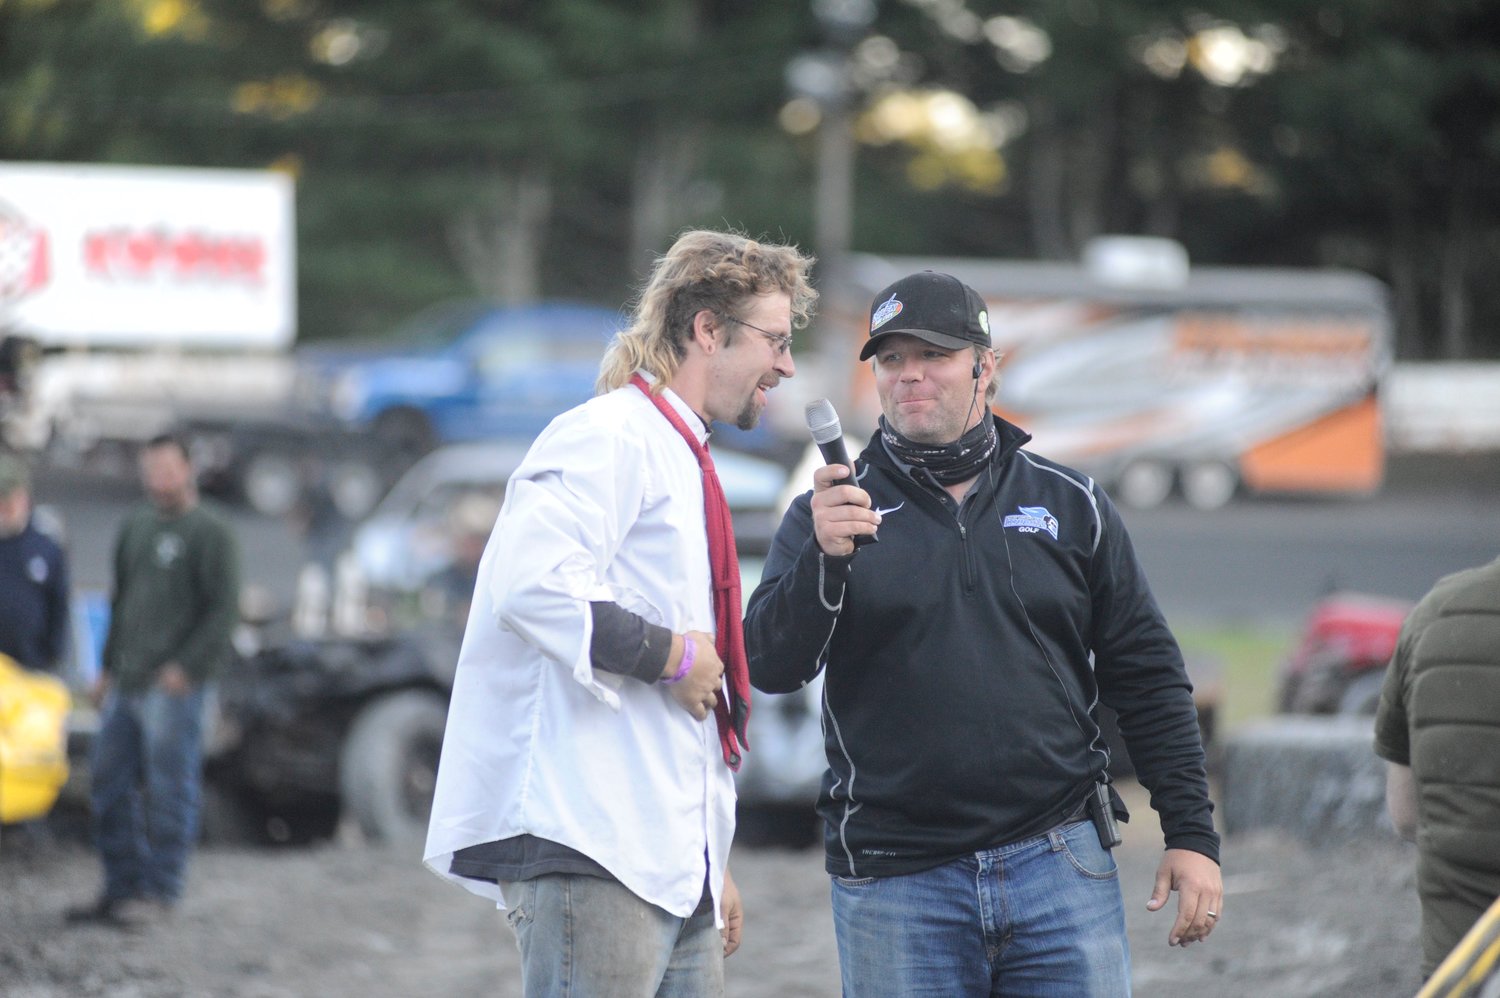 Well, I did it, dude. Jereme Spanburgh of Scranton talks to the spectators during a post-race interview with Andy Crane, the track’s co-announcer, promoter and race car driver.